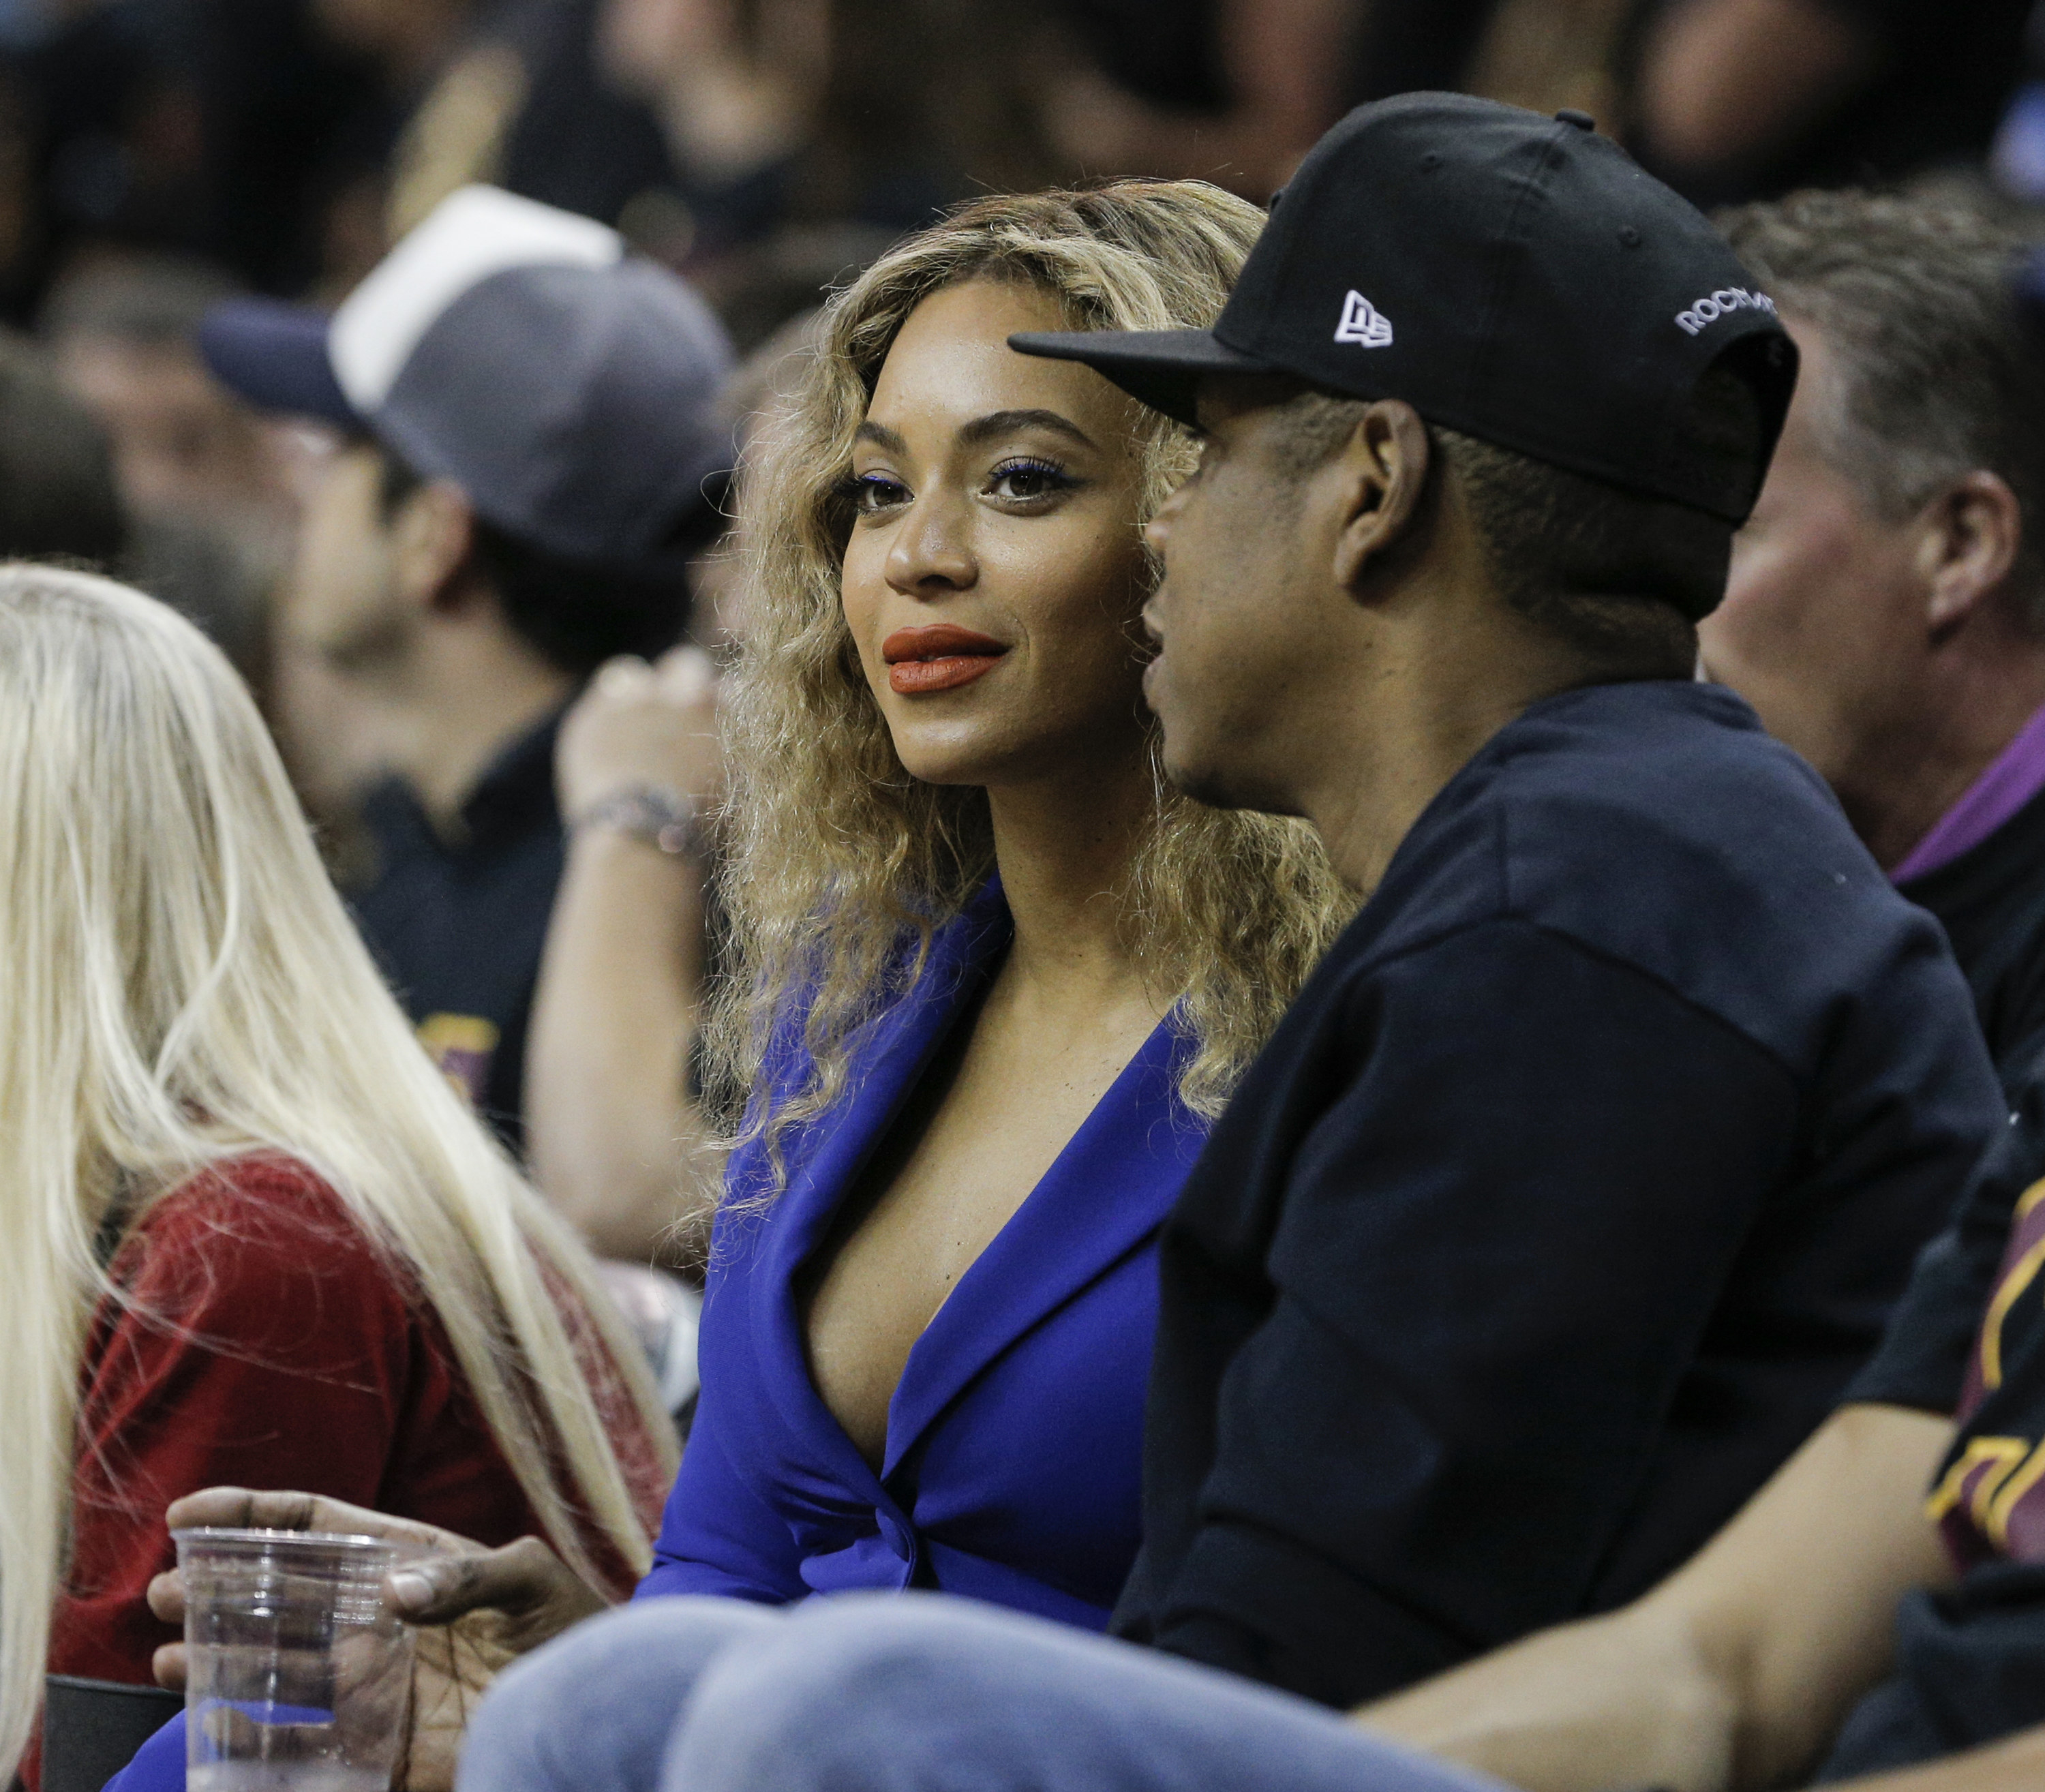 Beyonce and Jay-Z watch Game 6 of the NBA Finals at The Quicken Loans Arena